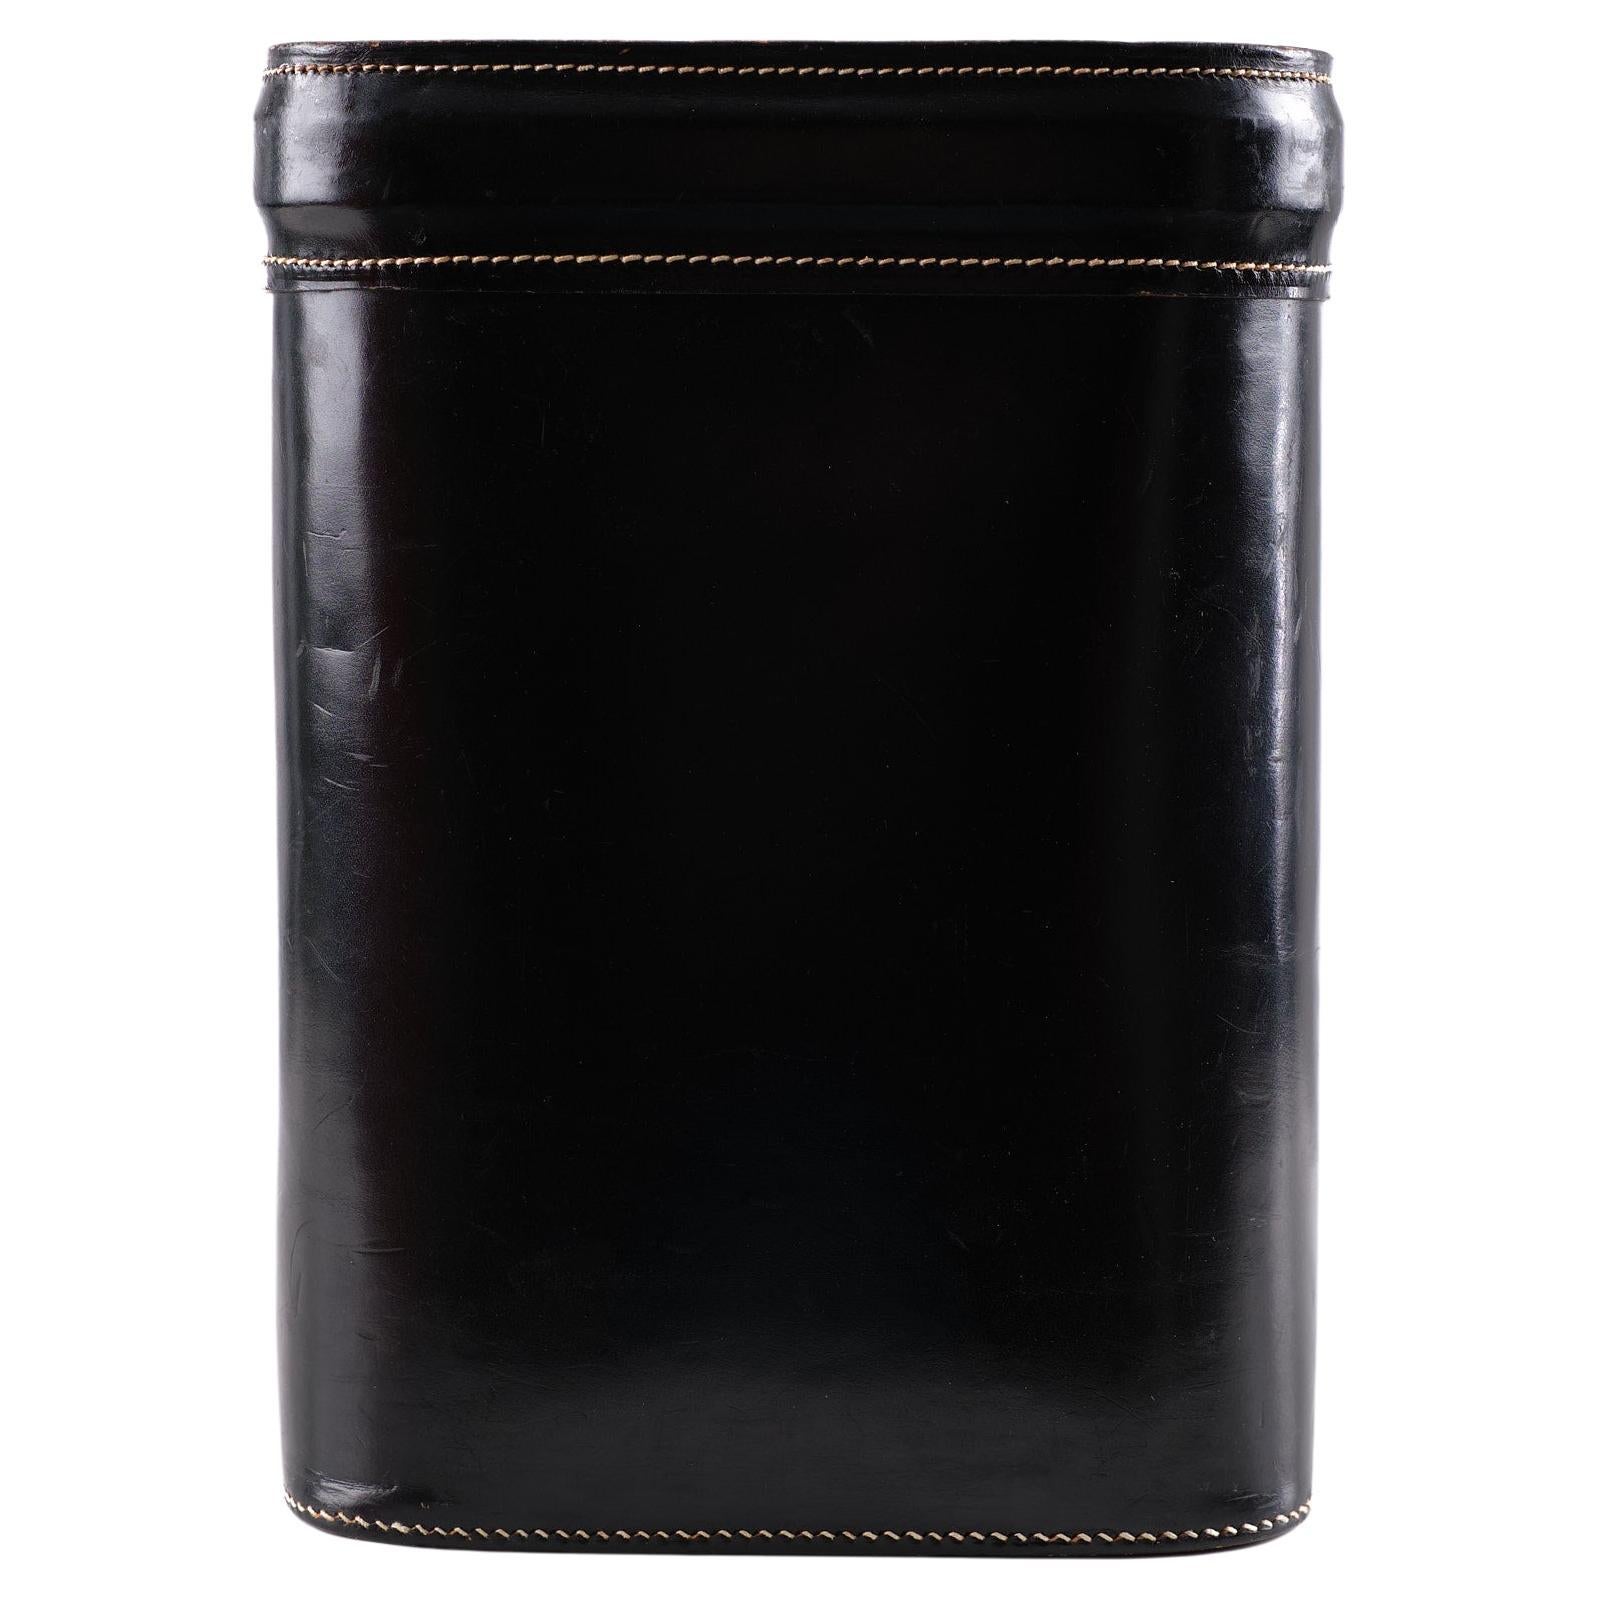 Very nice stich leather waste basket, In Black color. Still in very 
good condition.